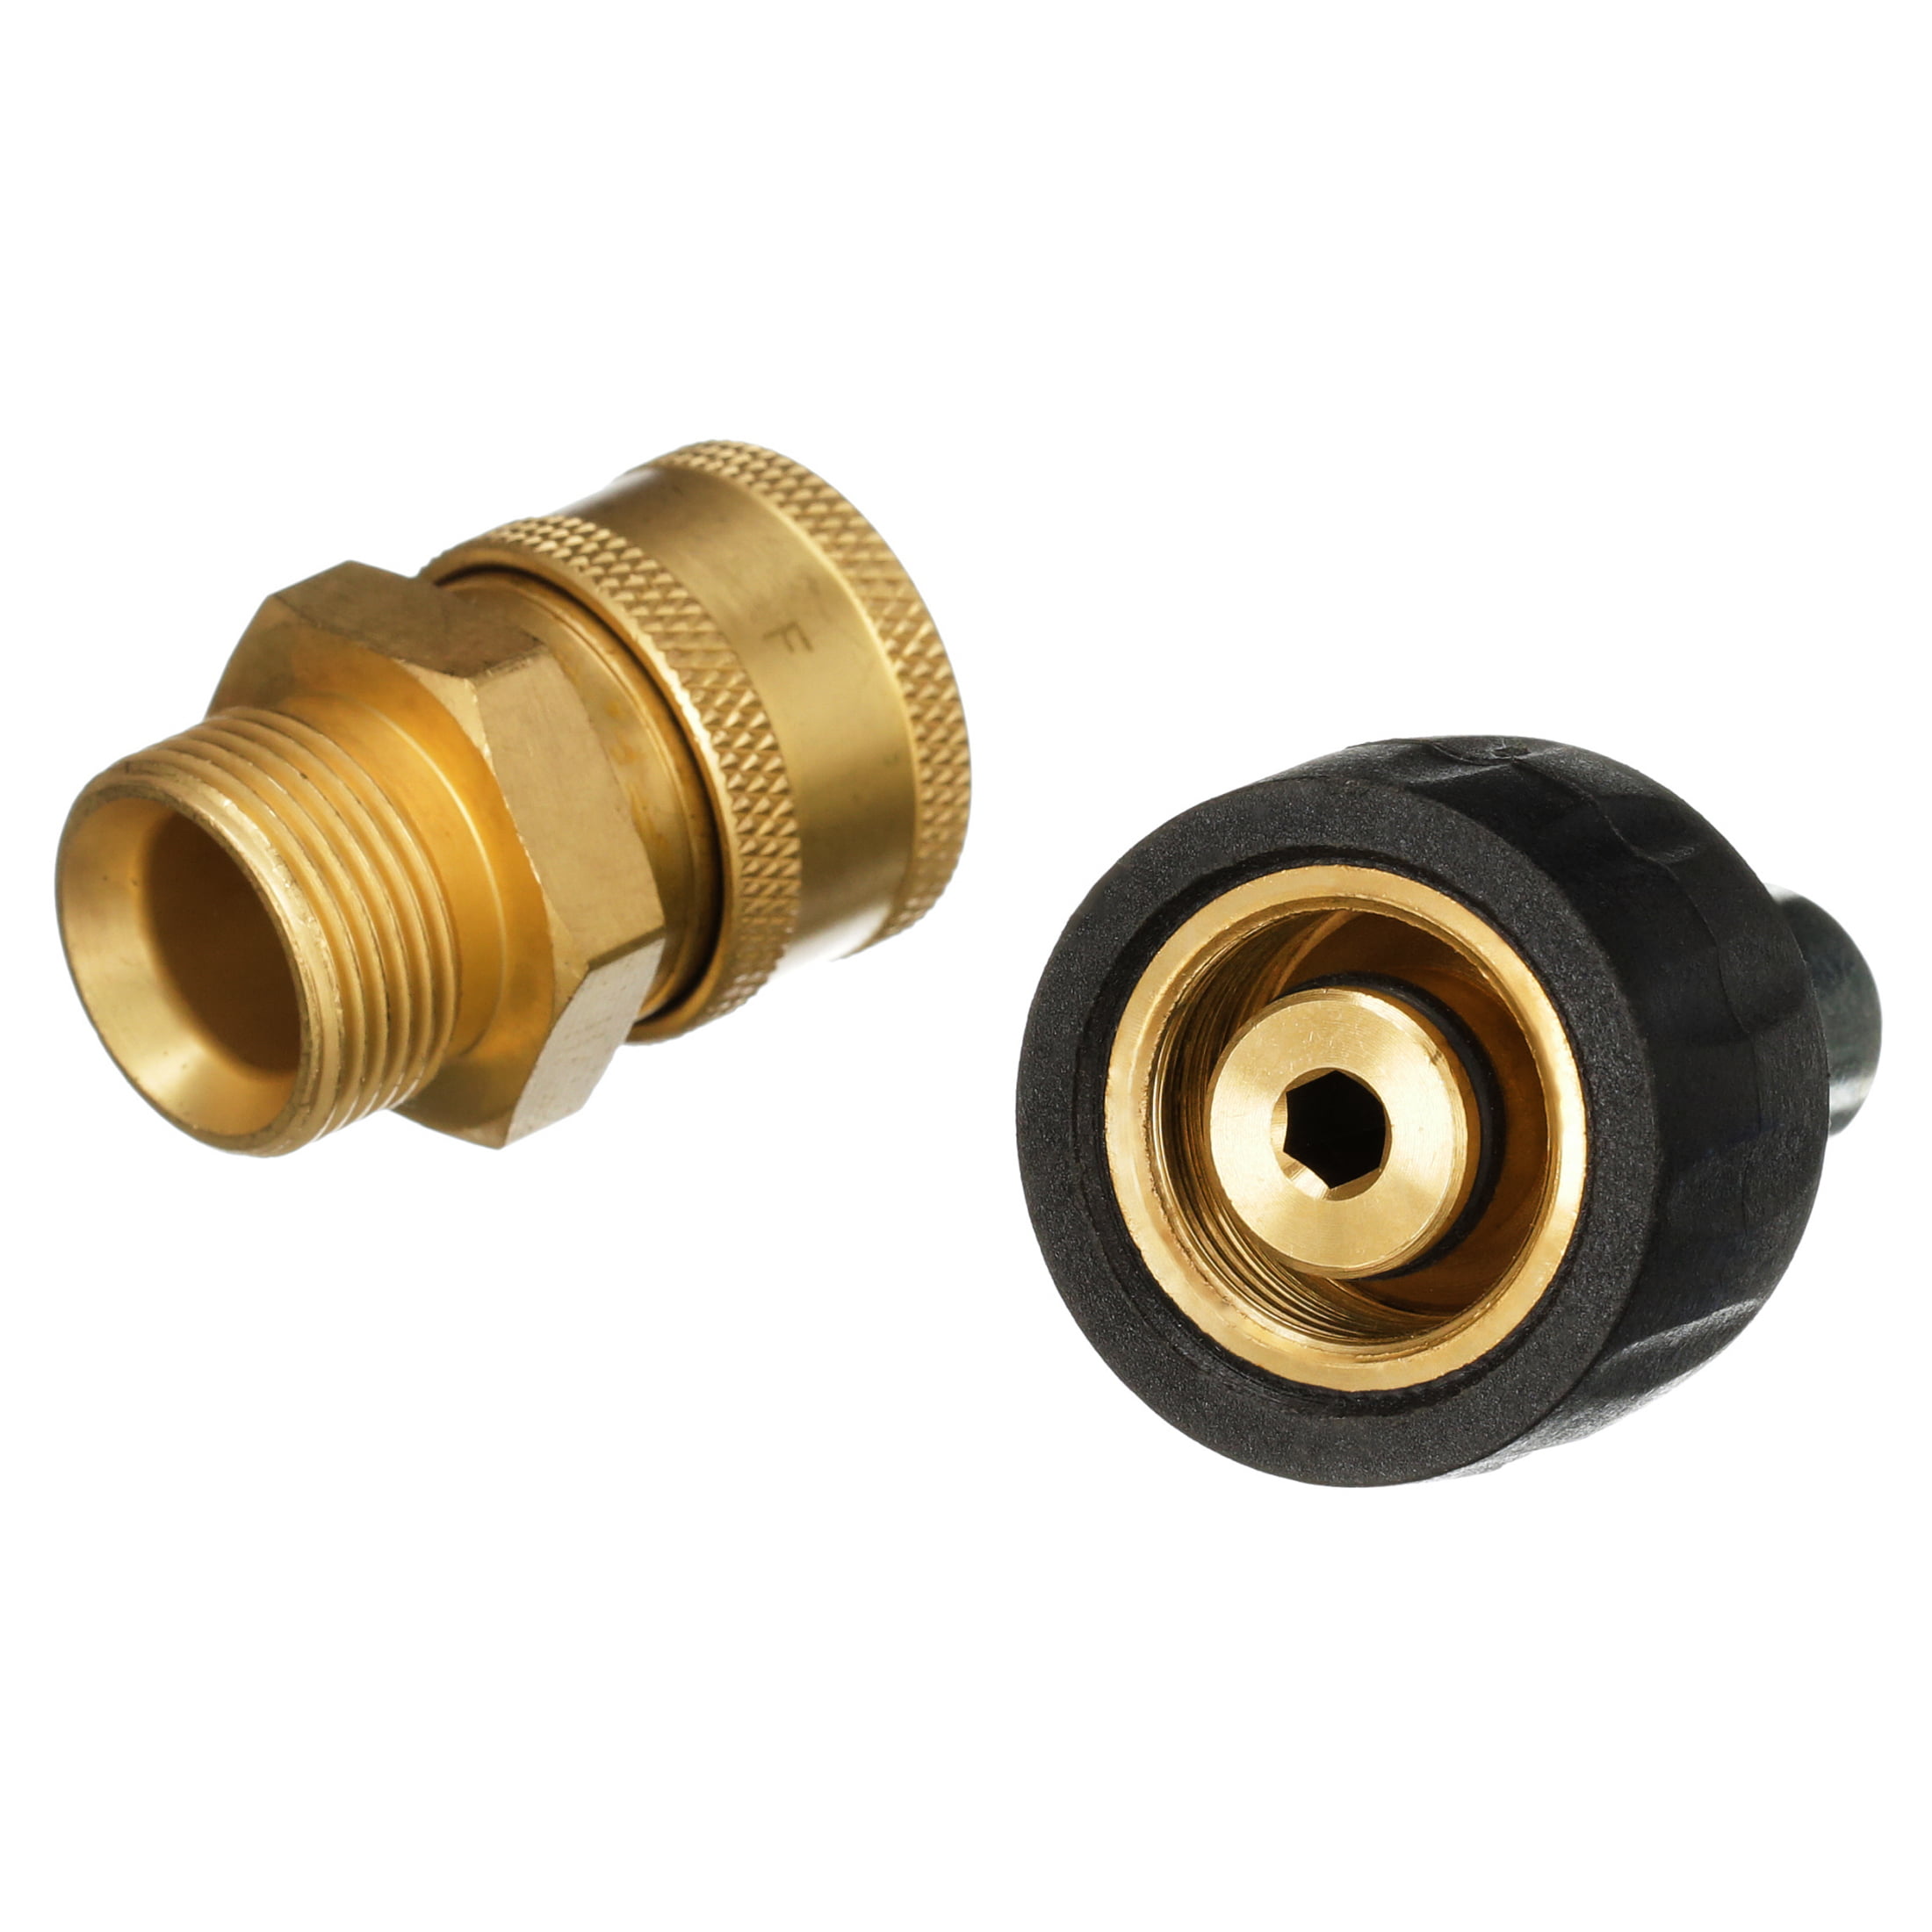 High Pressure M14x11.8mm Hose Quick Connect 5000PSI Pressure Washer Kit Adapters